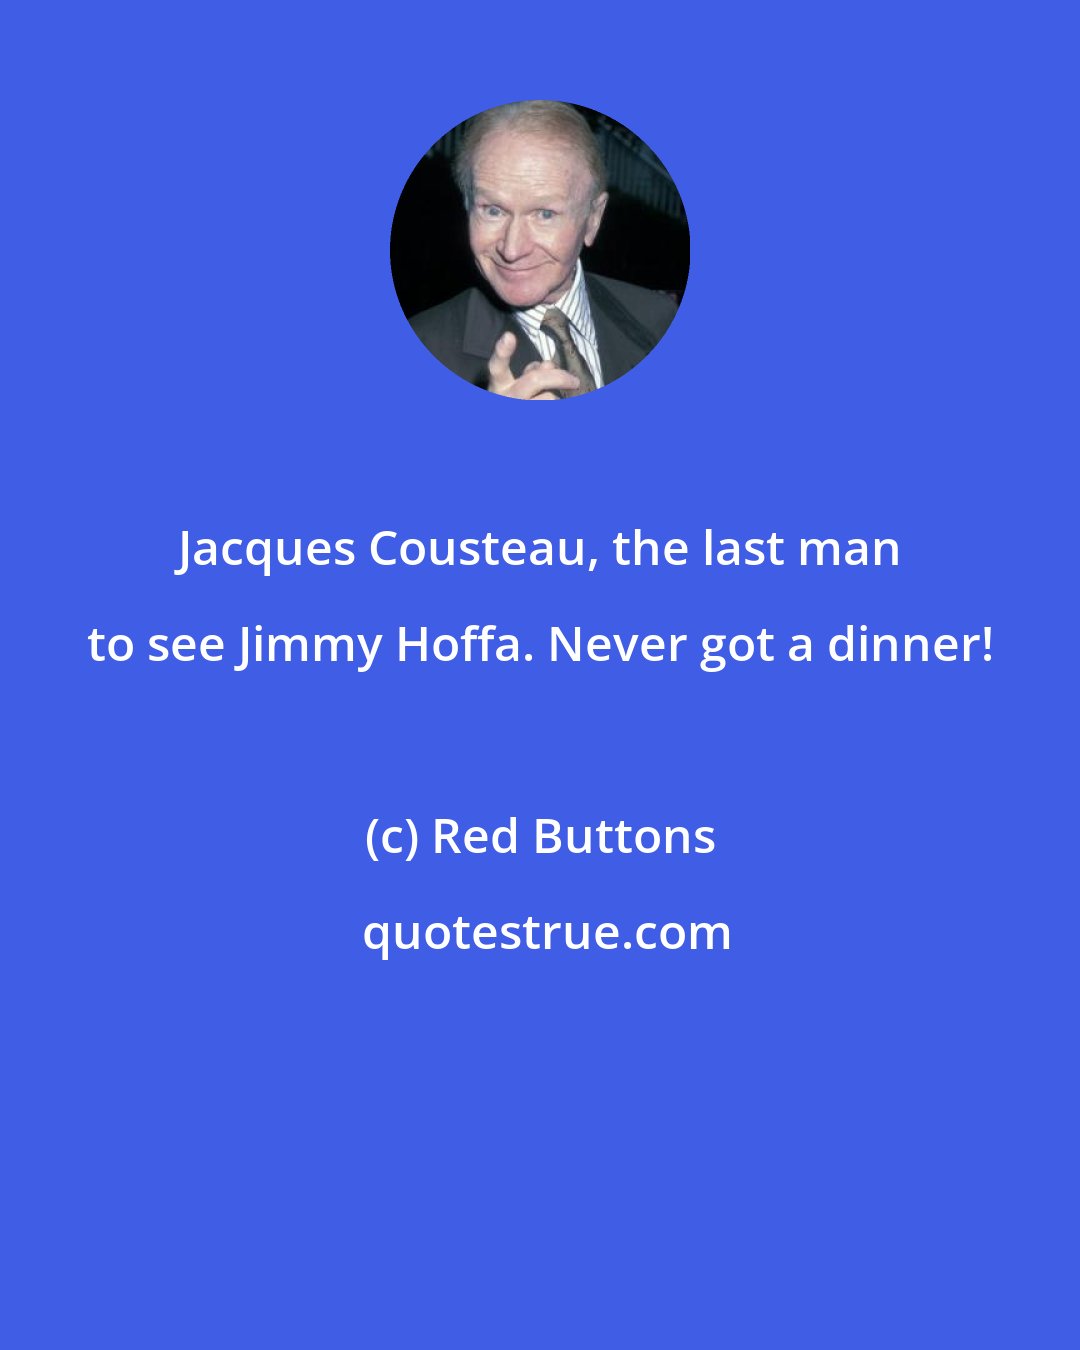 Red Buttons: Jacques Cousteau, the last man to see Jimmy Hoffa. Never got a dinner!